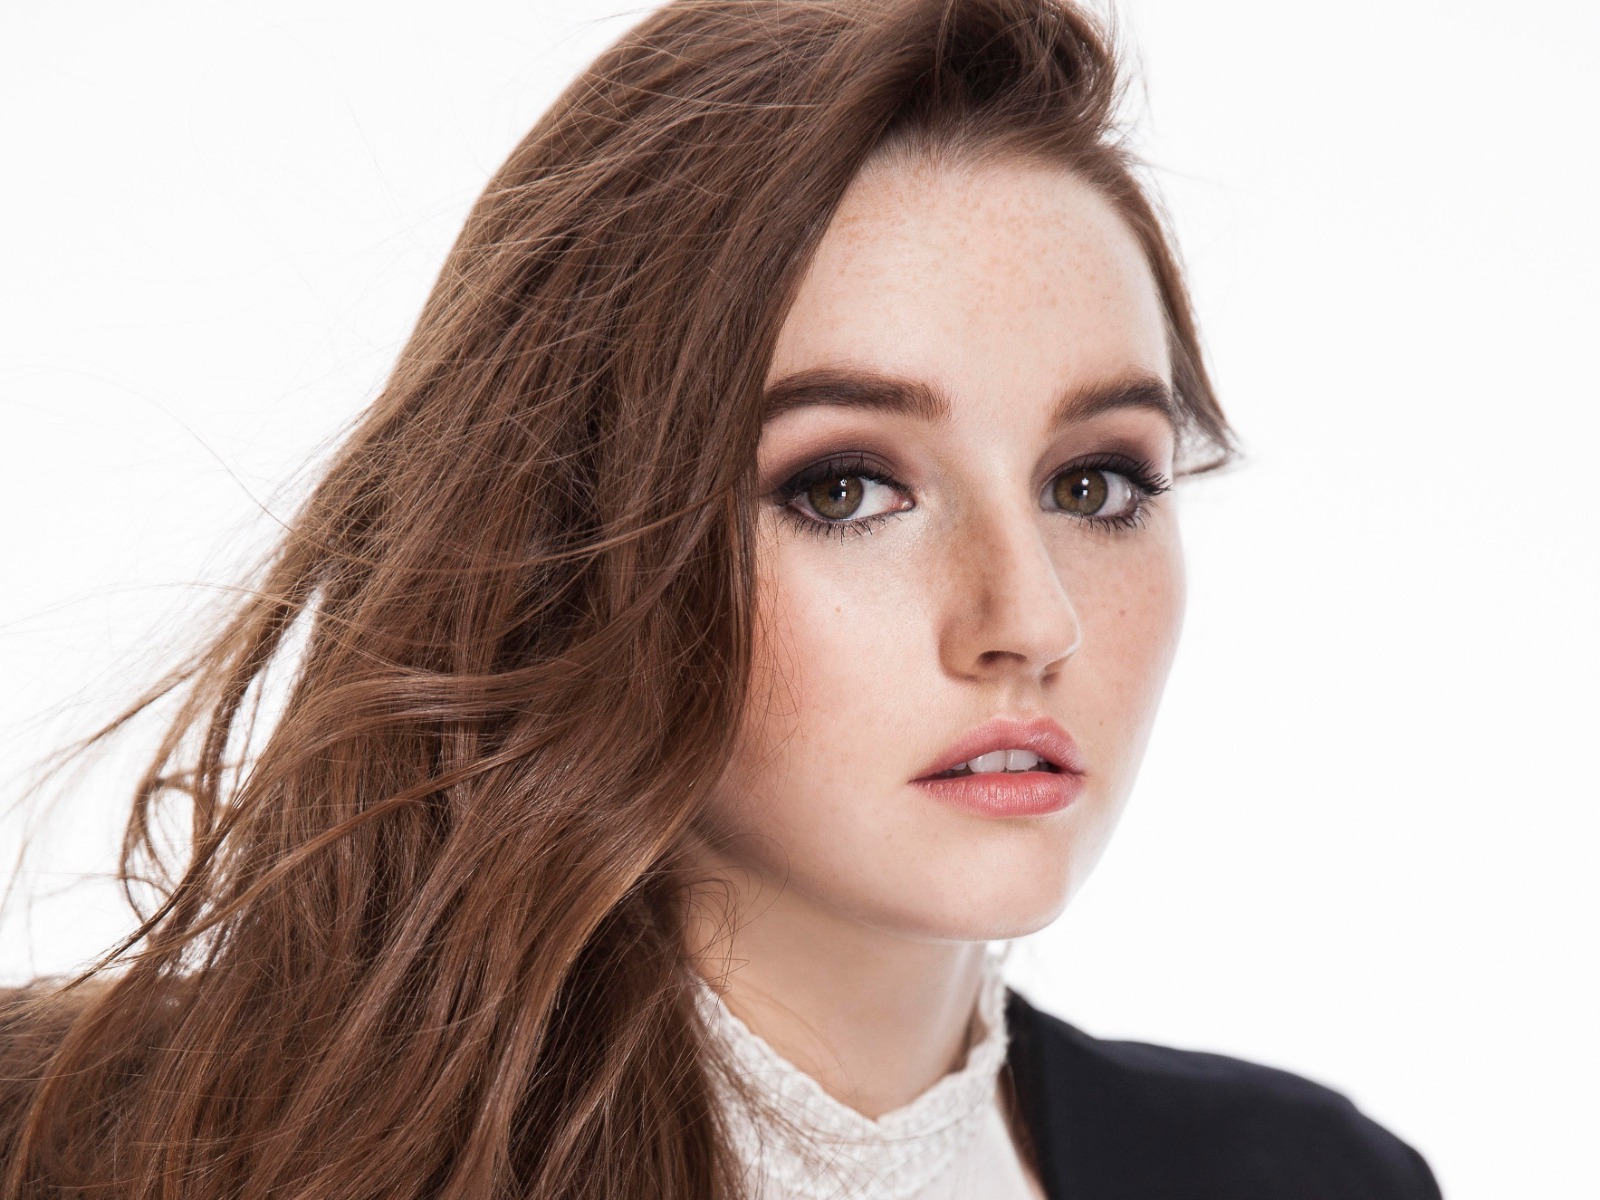 Kaitlyn Dever, The Last of Us